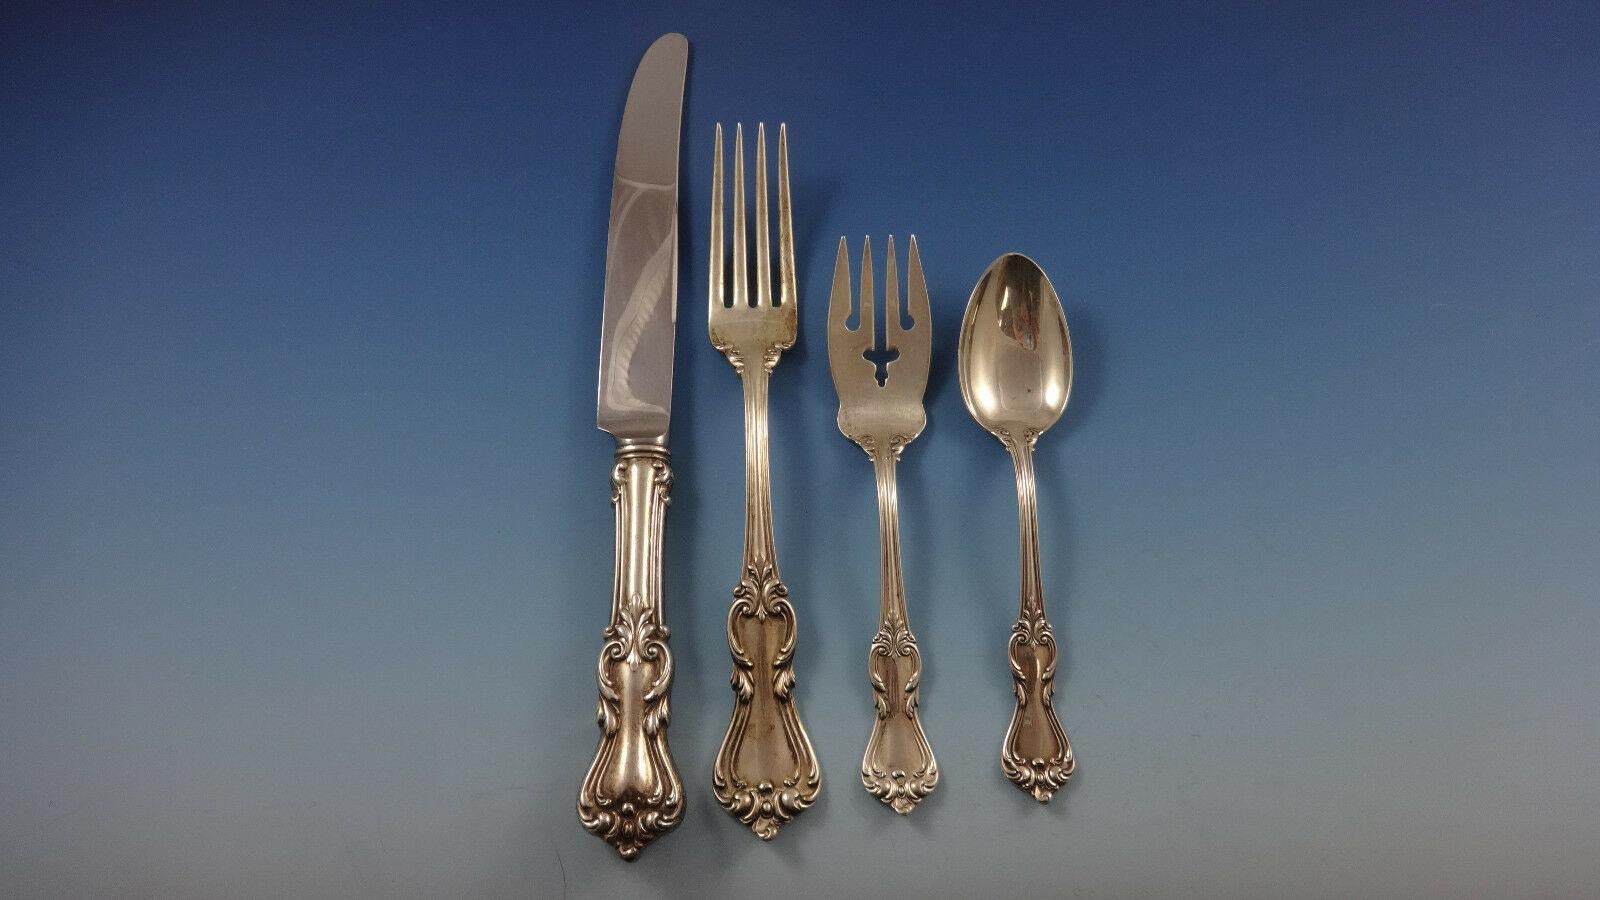 Marlborough by Reed & Barton dinner size sterling silver flatware set, 53 pieces. This set includes:

12 dinner size knives, 9 3/4